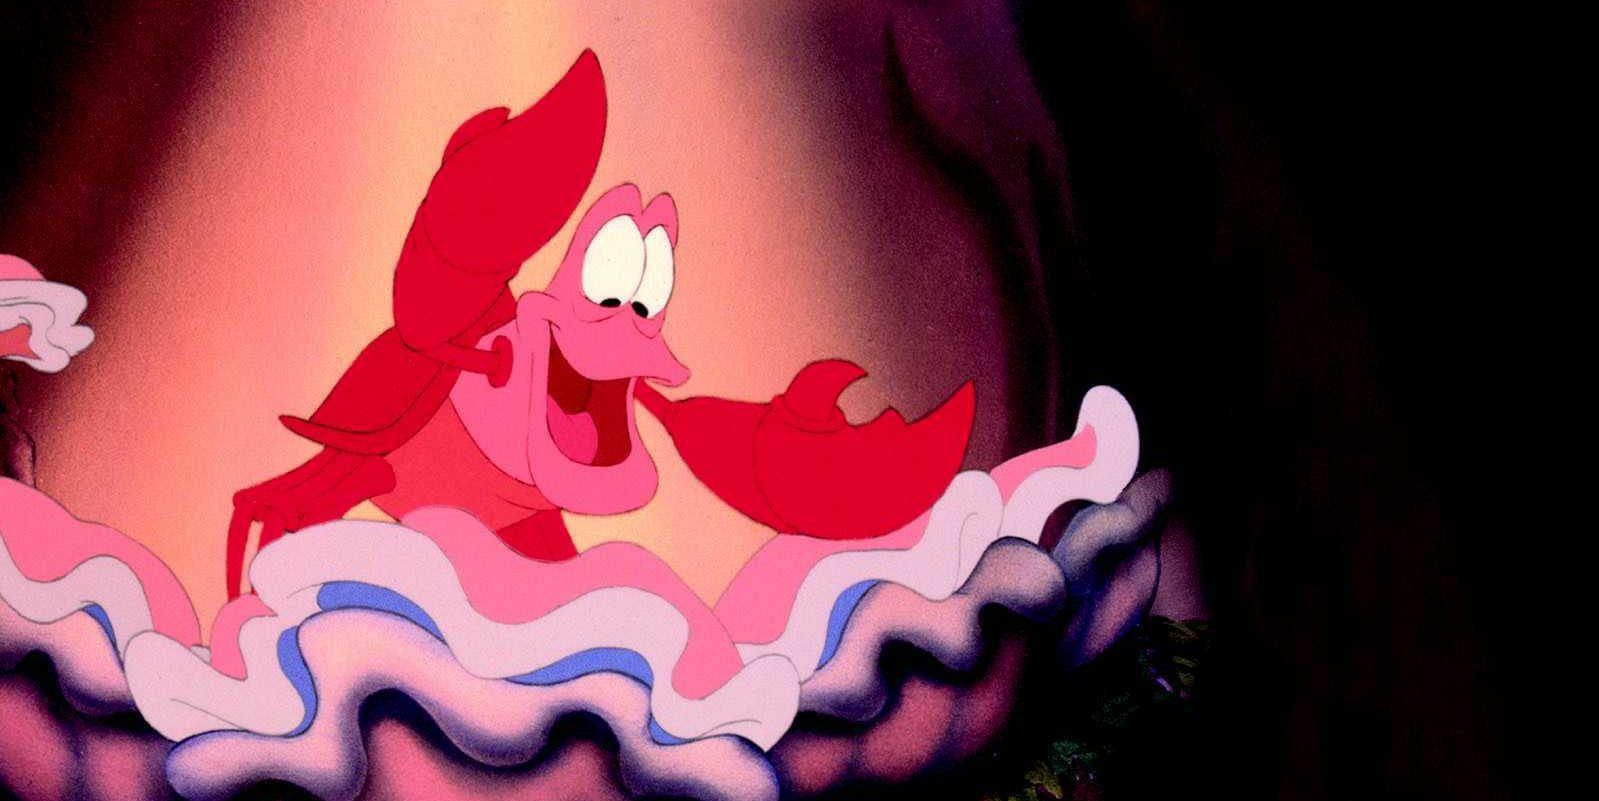 Sebastian in The Little Mermaid standing in a shell, smiling.